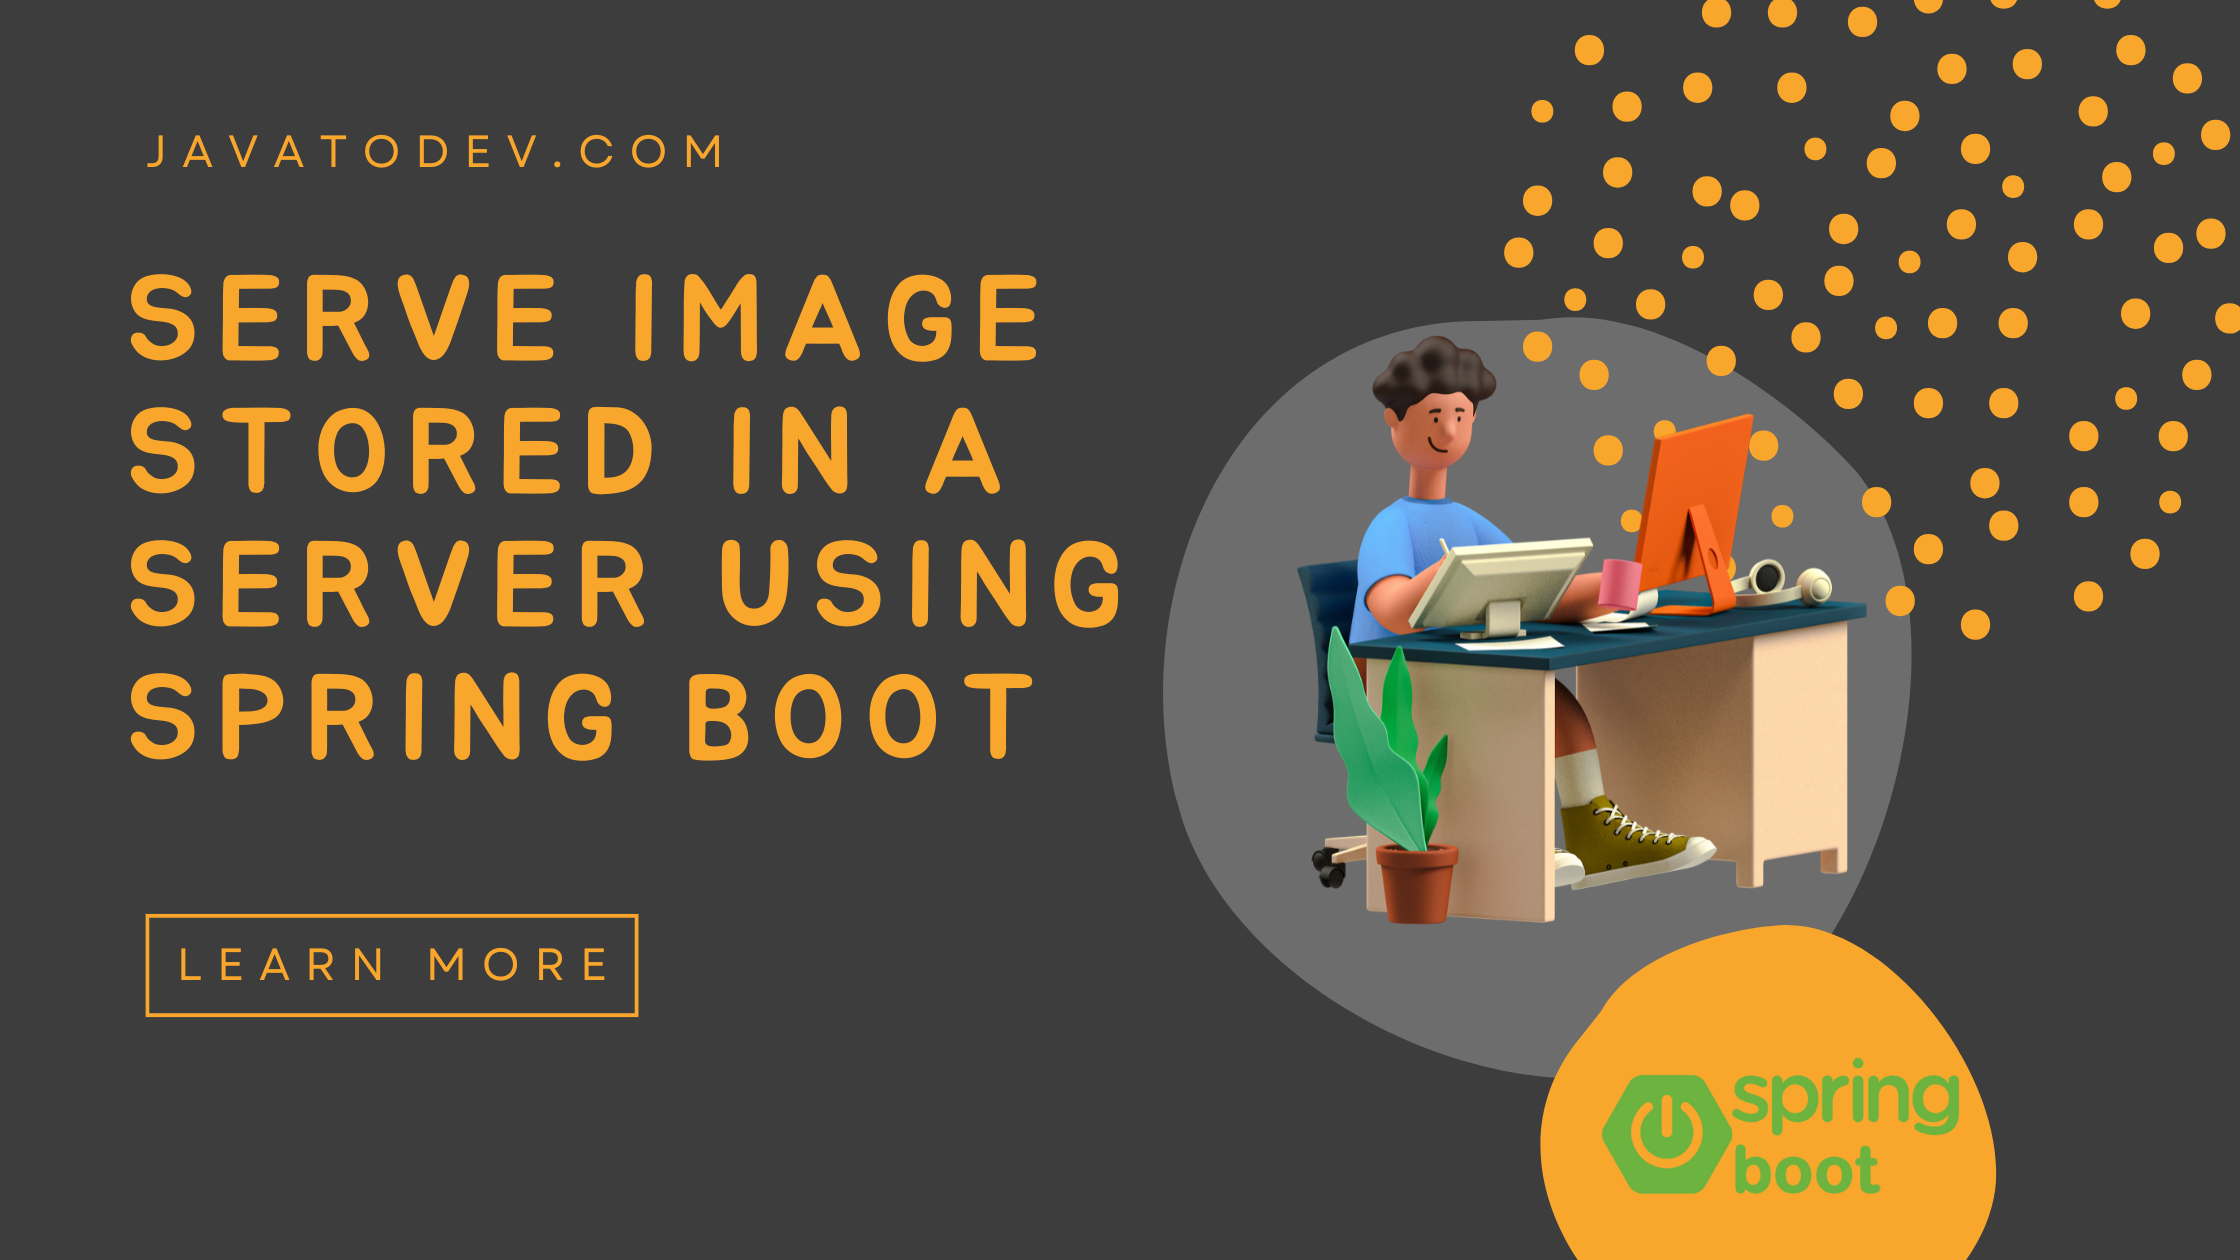 How to Serve Image Stored in a Server Using Spring Boot